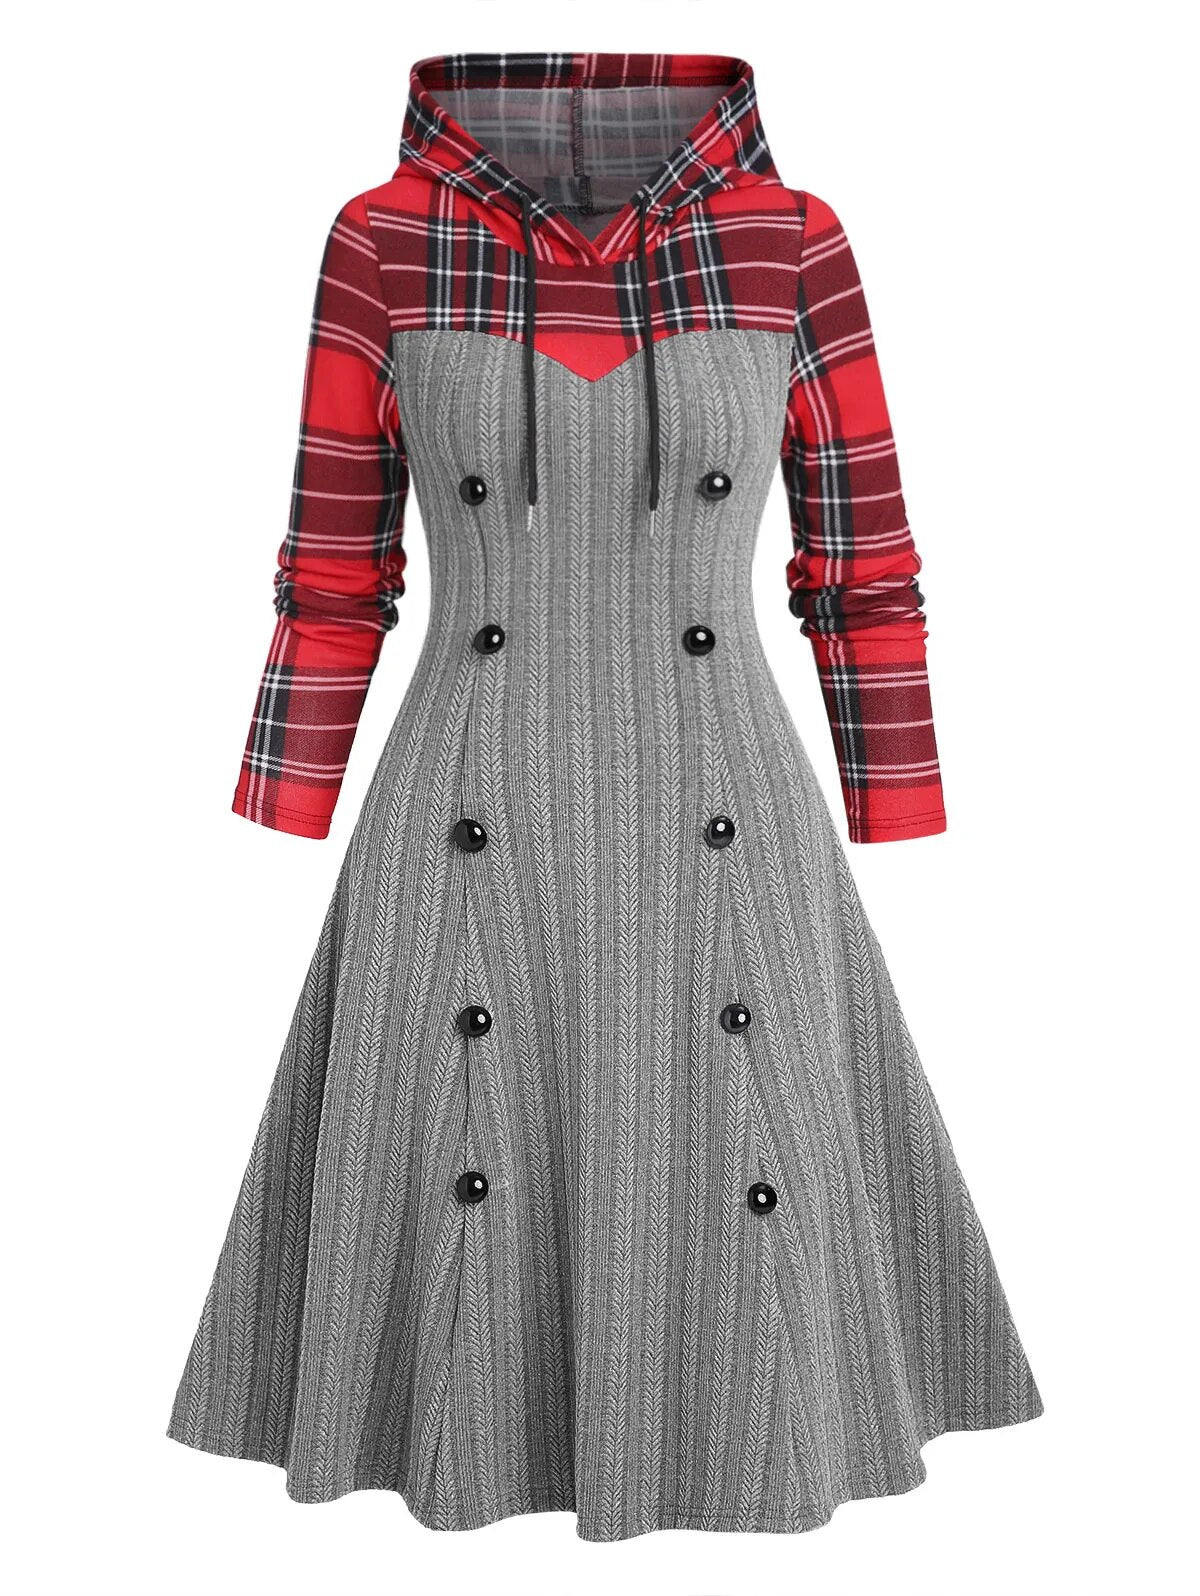 Plaid Textured Knit Hooded Dress – The Official Strange & Creepy Store!